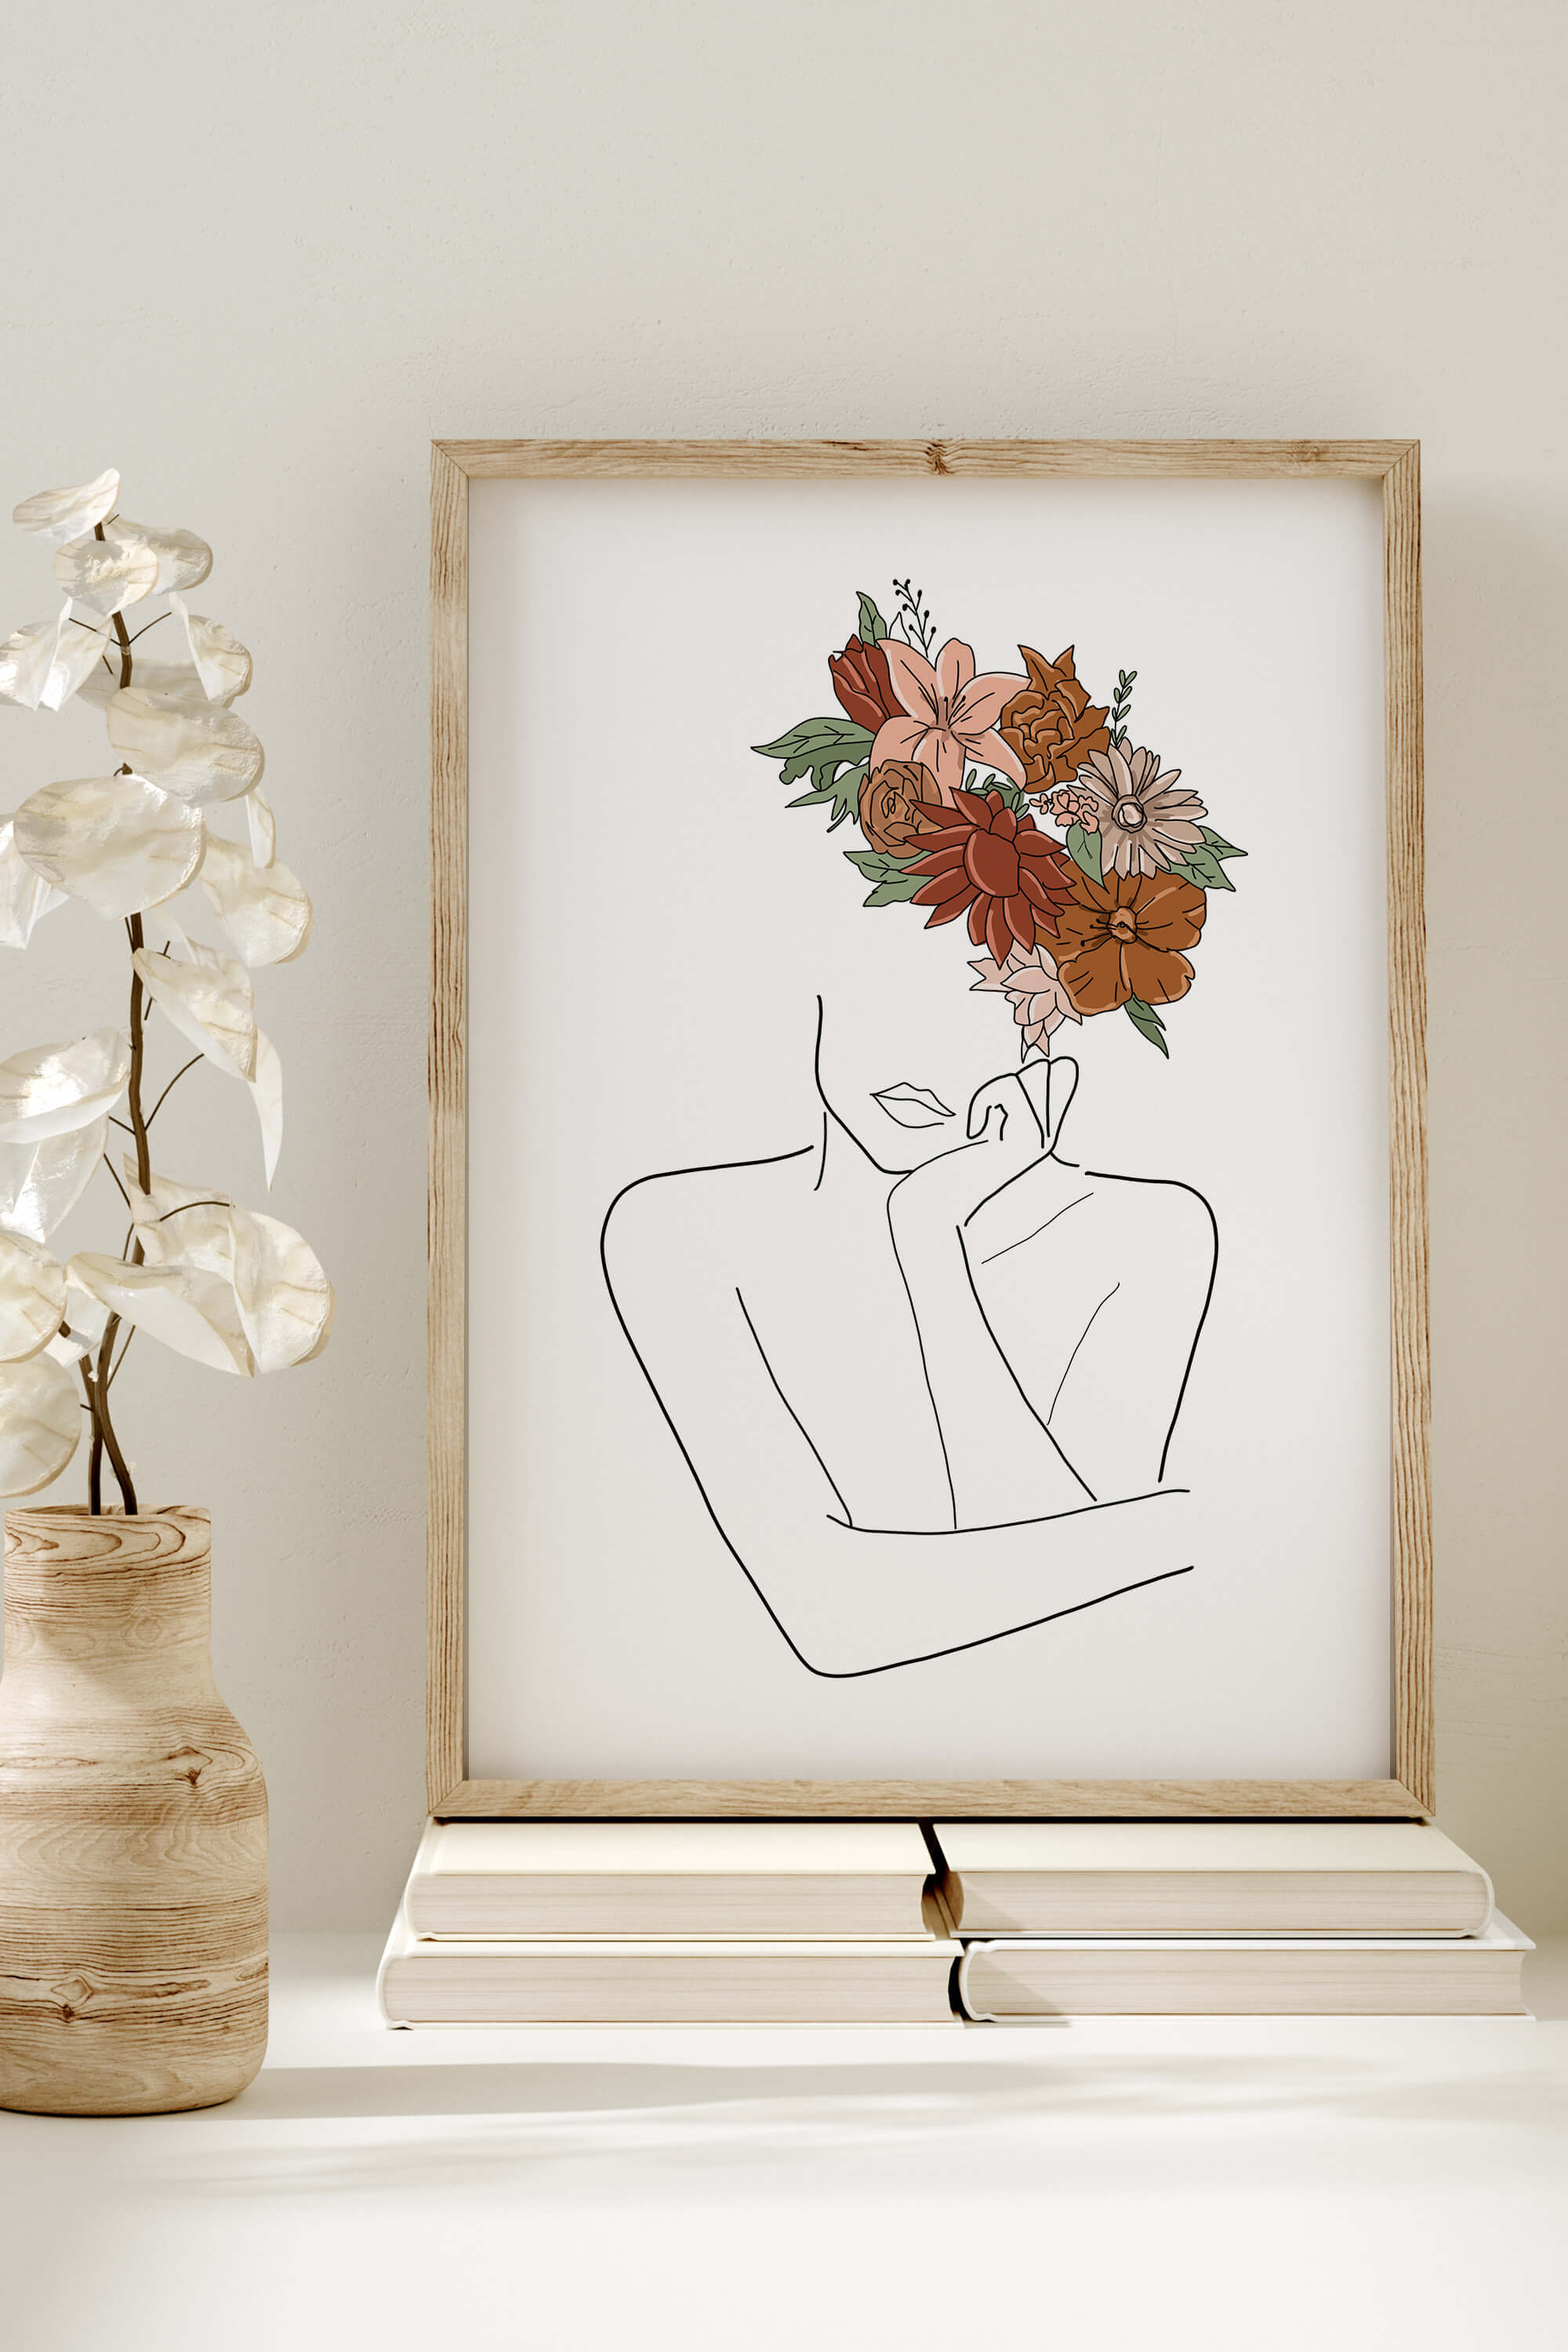 Introspective art print featuring a woman with a flower head, perfect for adding elegance and reflection to any room.